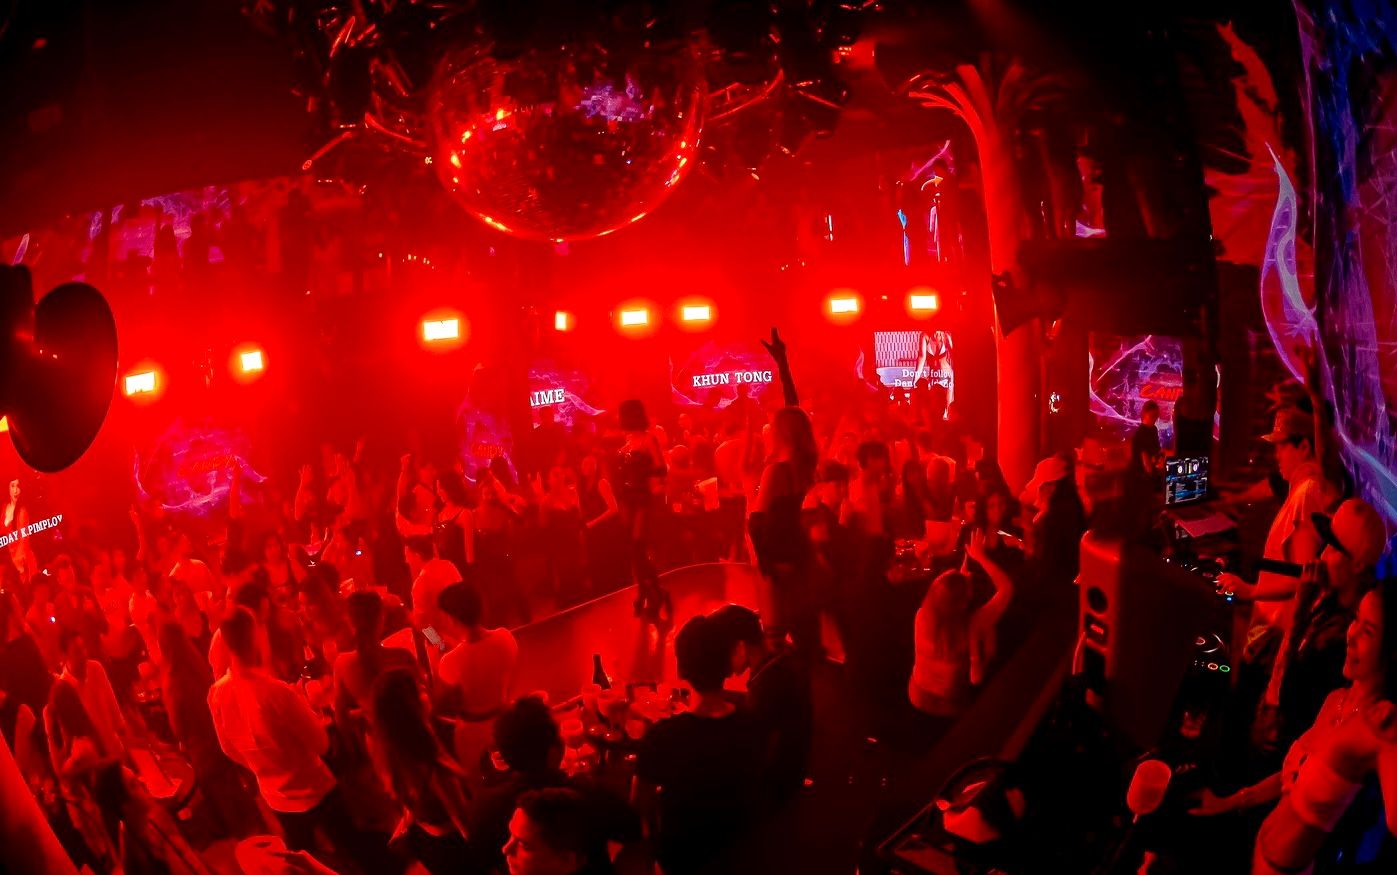 Eden Club Bangkok promises a night like no other.